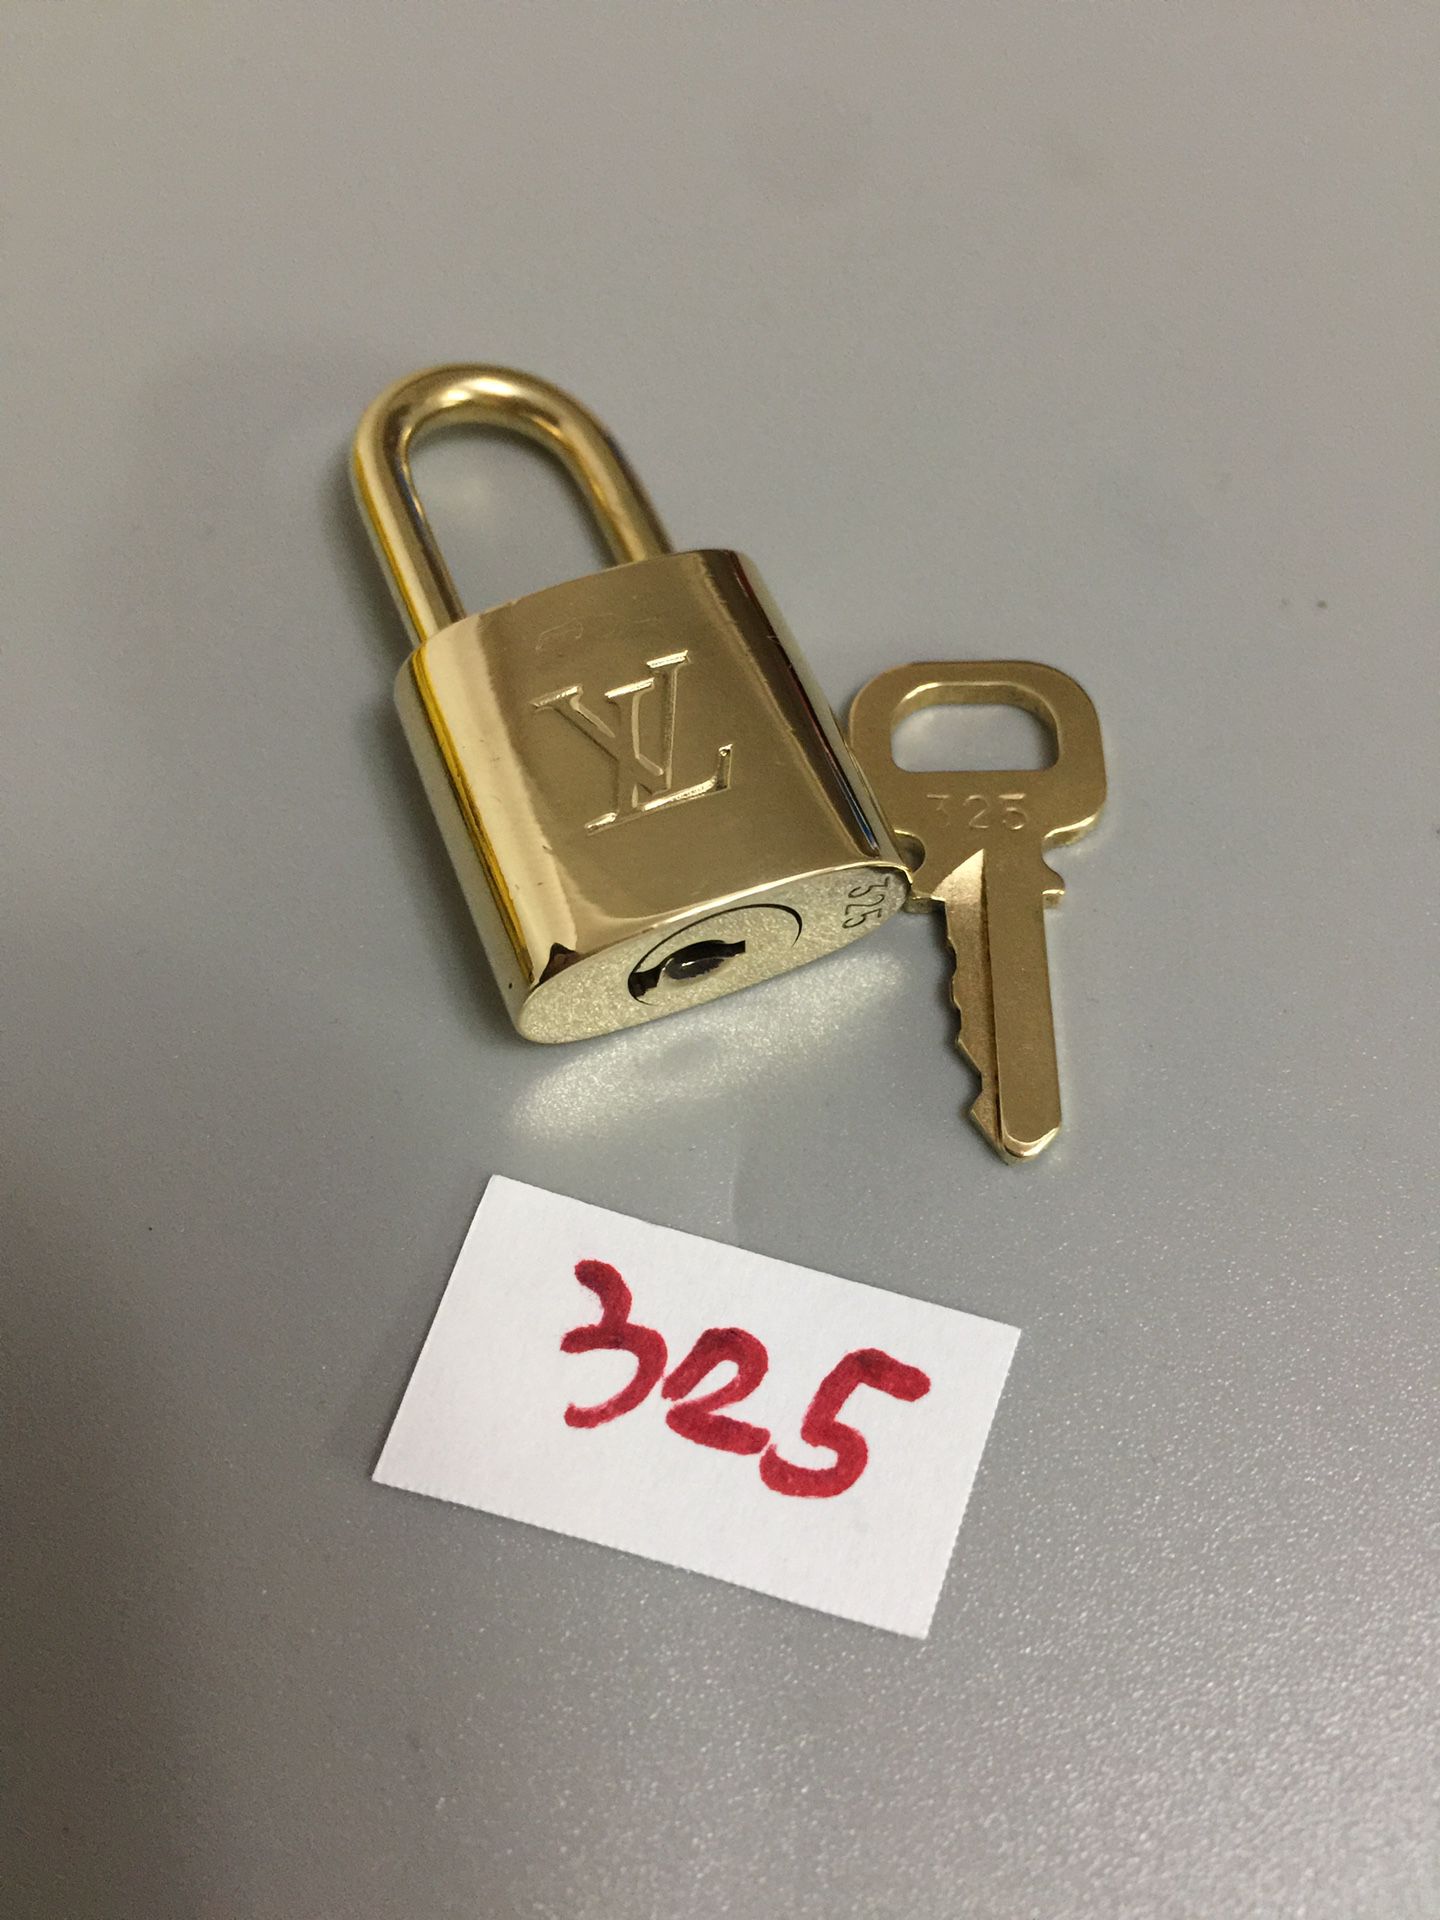 Louis Vuitton Locks- No Key for Sale in Irving, TX - OfferUp